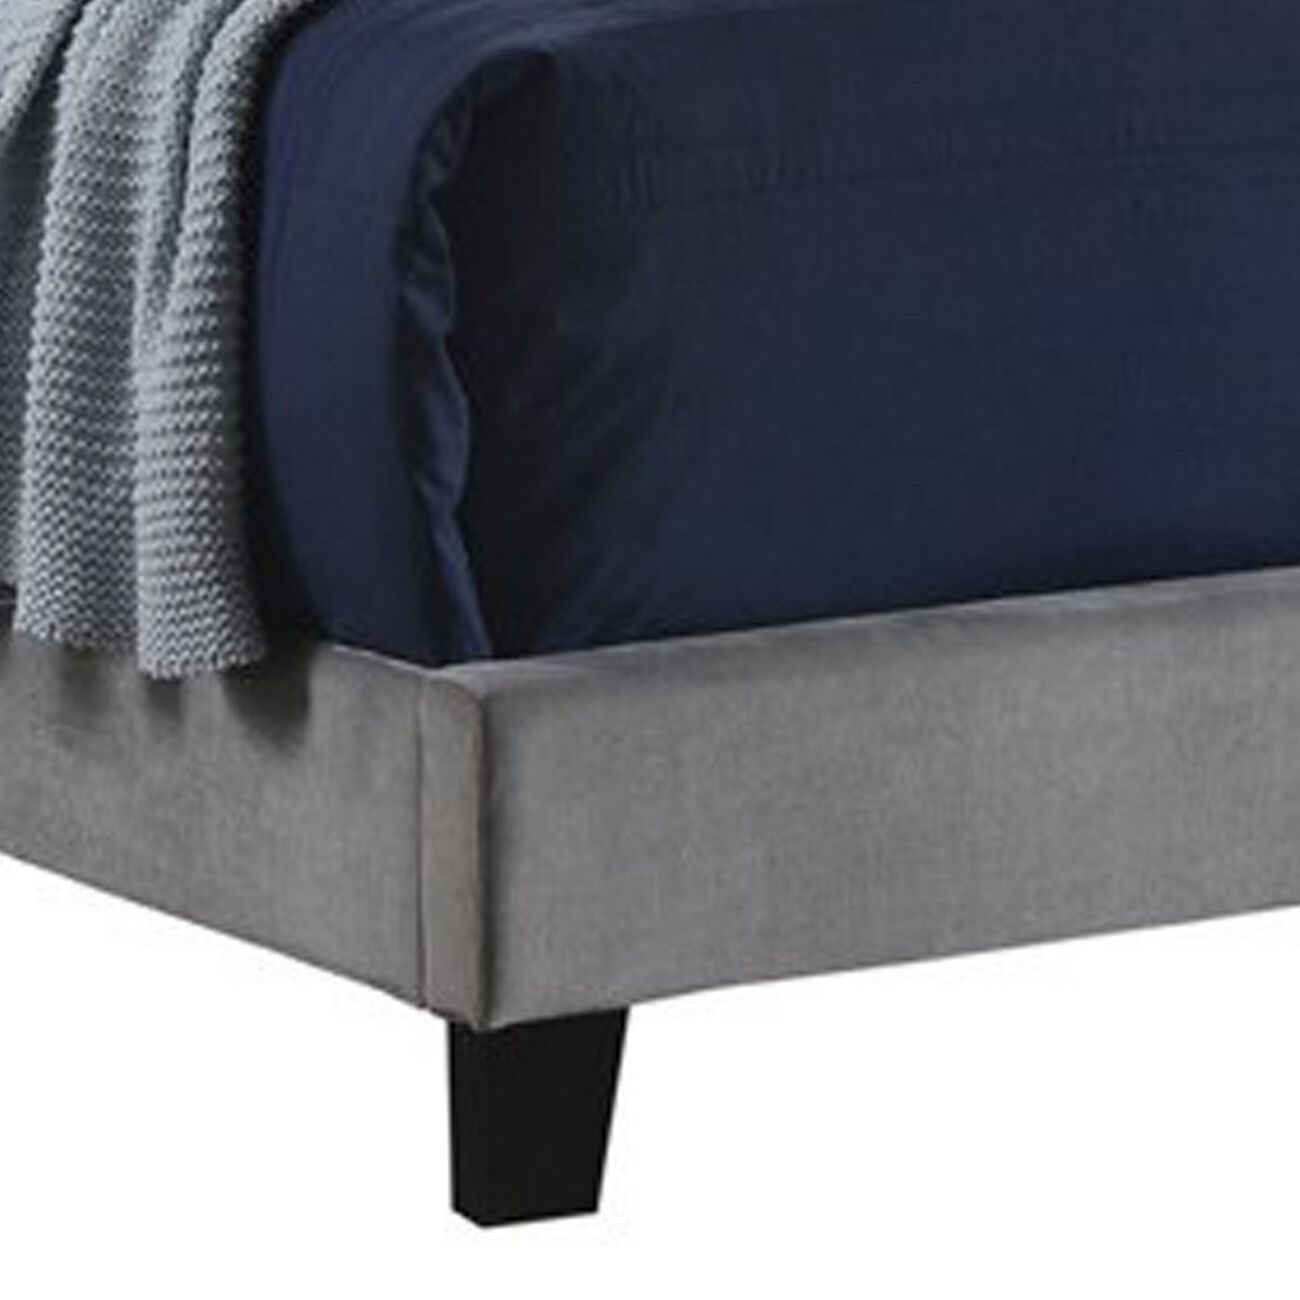 Fabric Upholstered Queen Size Bed with Scroll Headboard Design, Gray